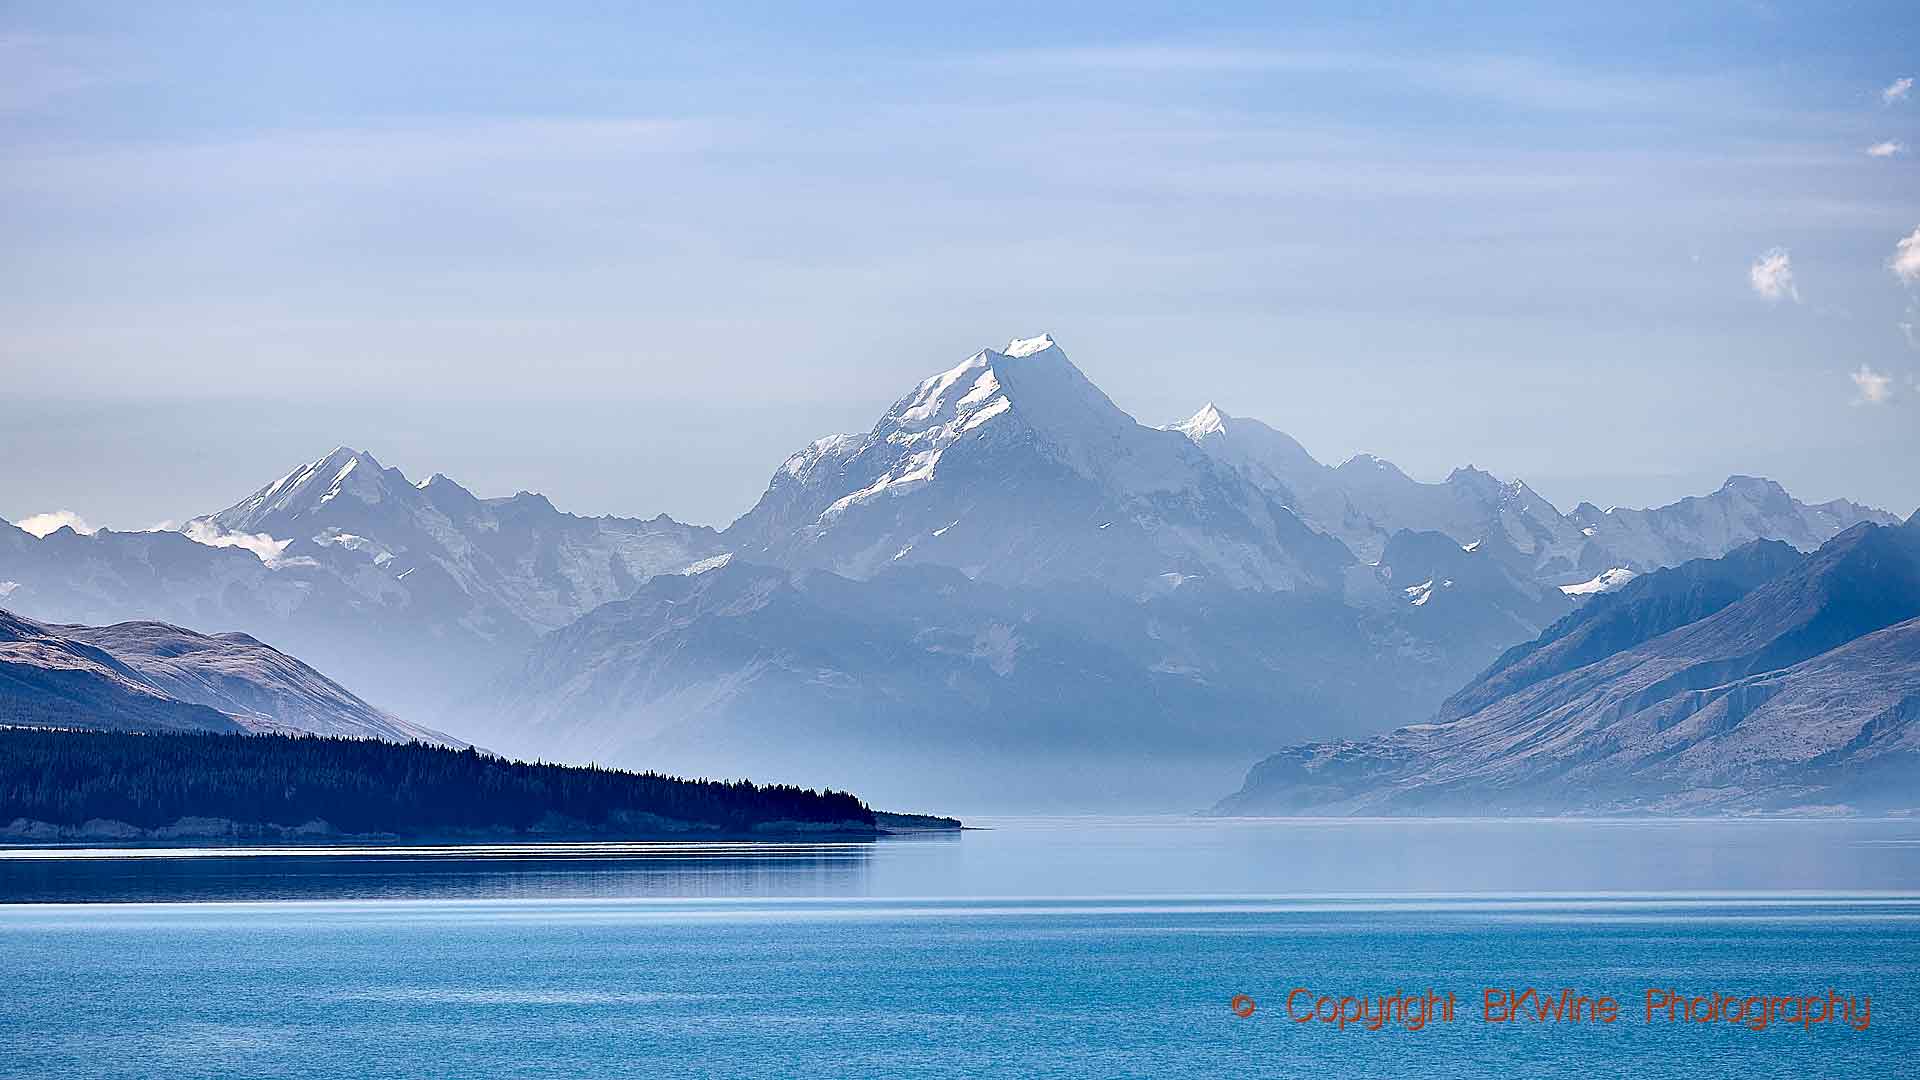 A view of Mount Cook over Lake Pukaki